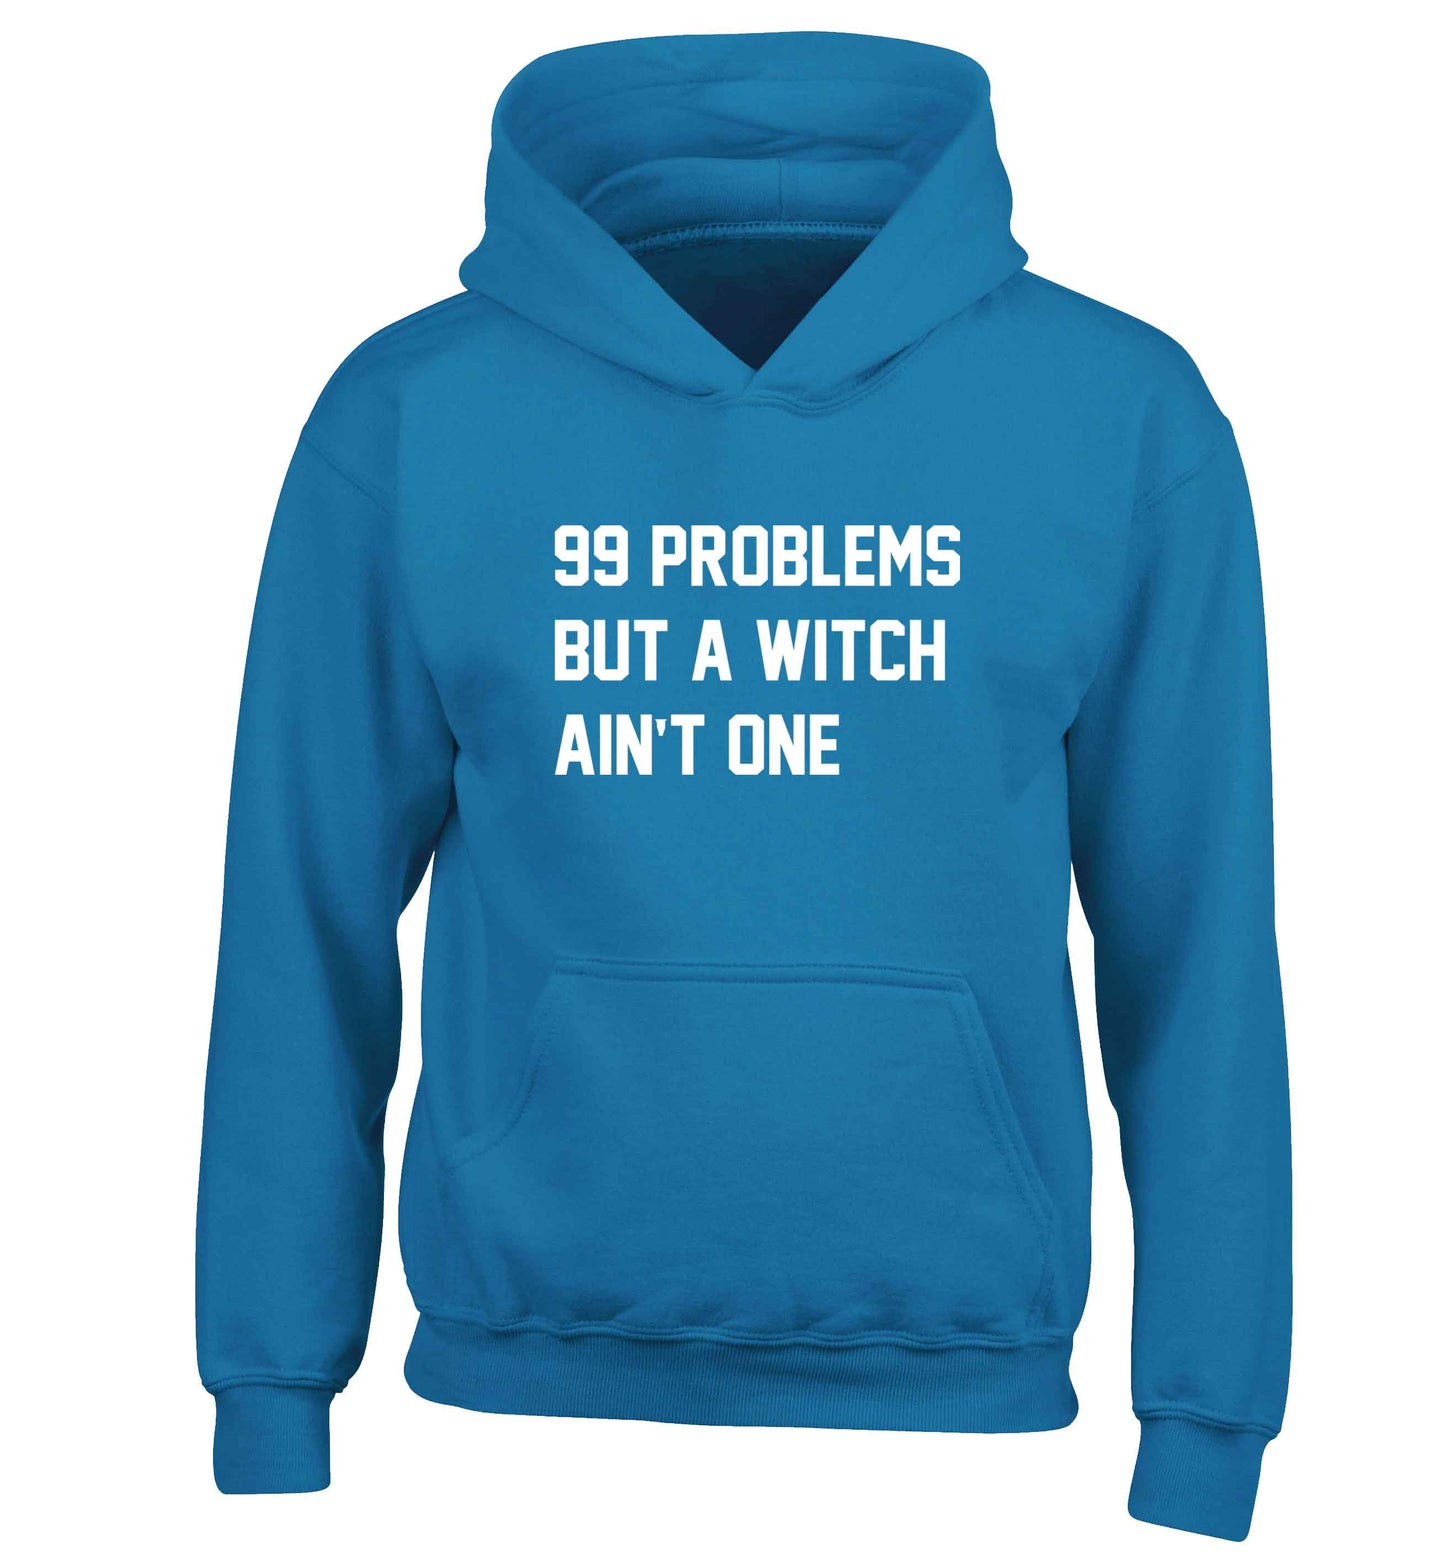 99 Problems but a witch aint one children's blue hoodie 12-13 Years